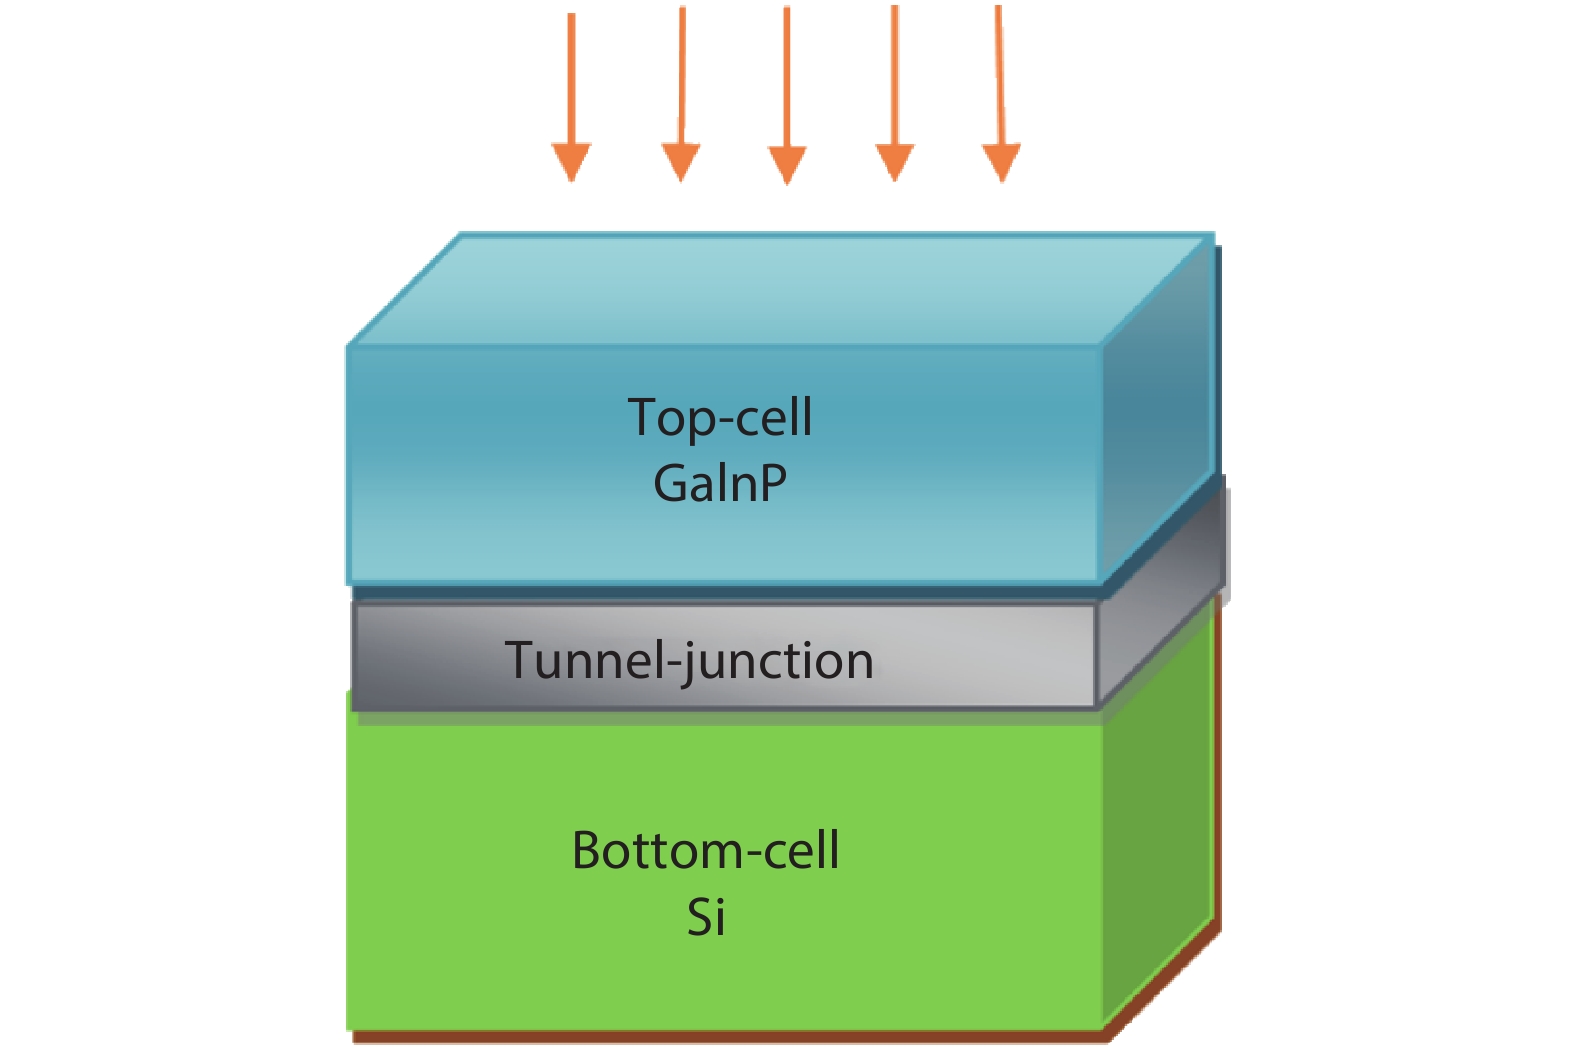 (Color online) Schematic cross-section of the MMJ GaInP/Si solar cell.